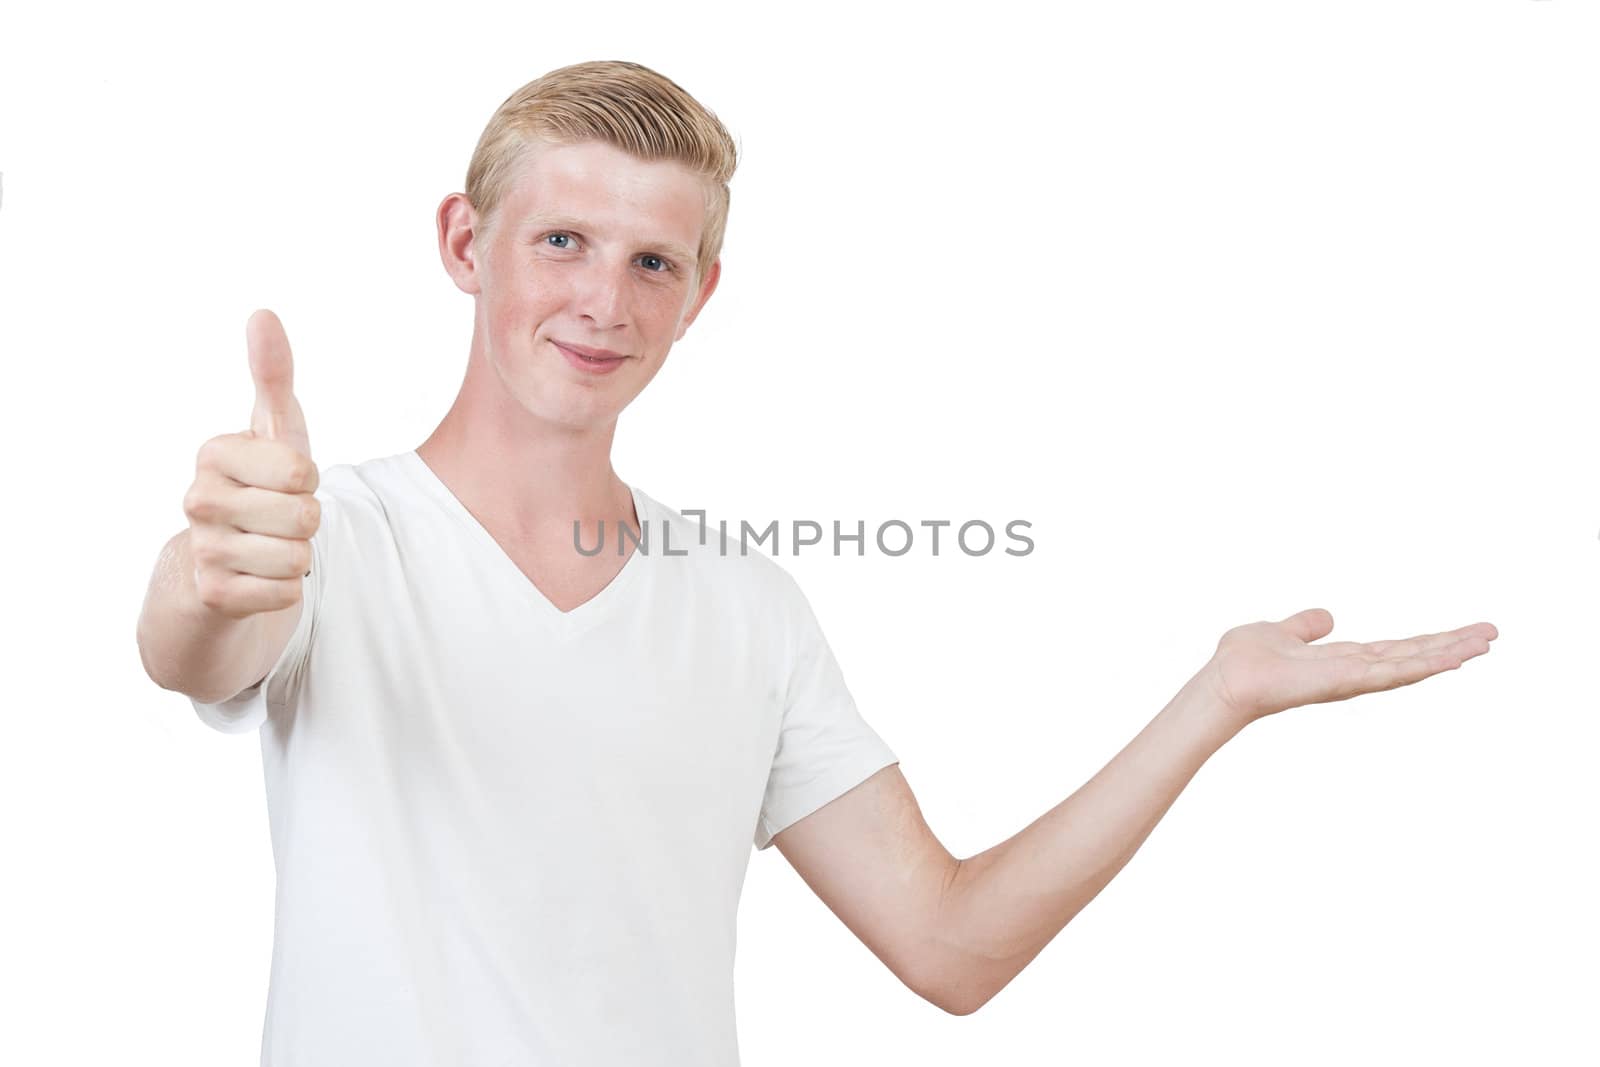 Portrait of a handsome young man thumbs up and present something against white background